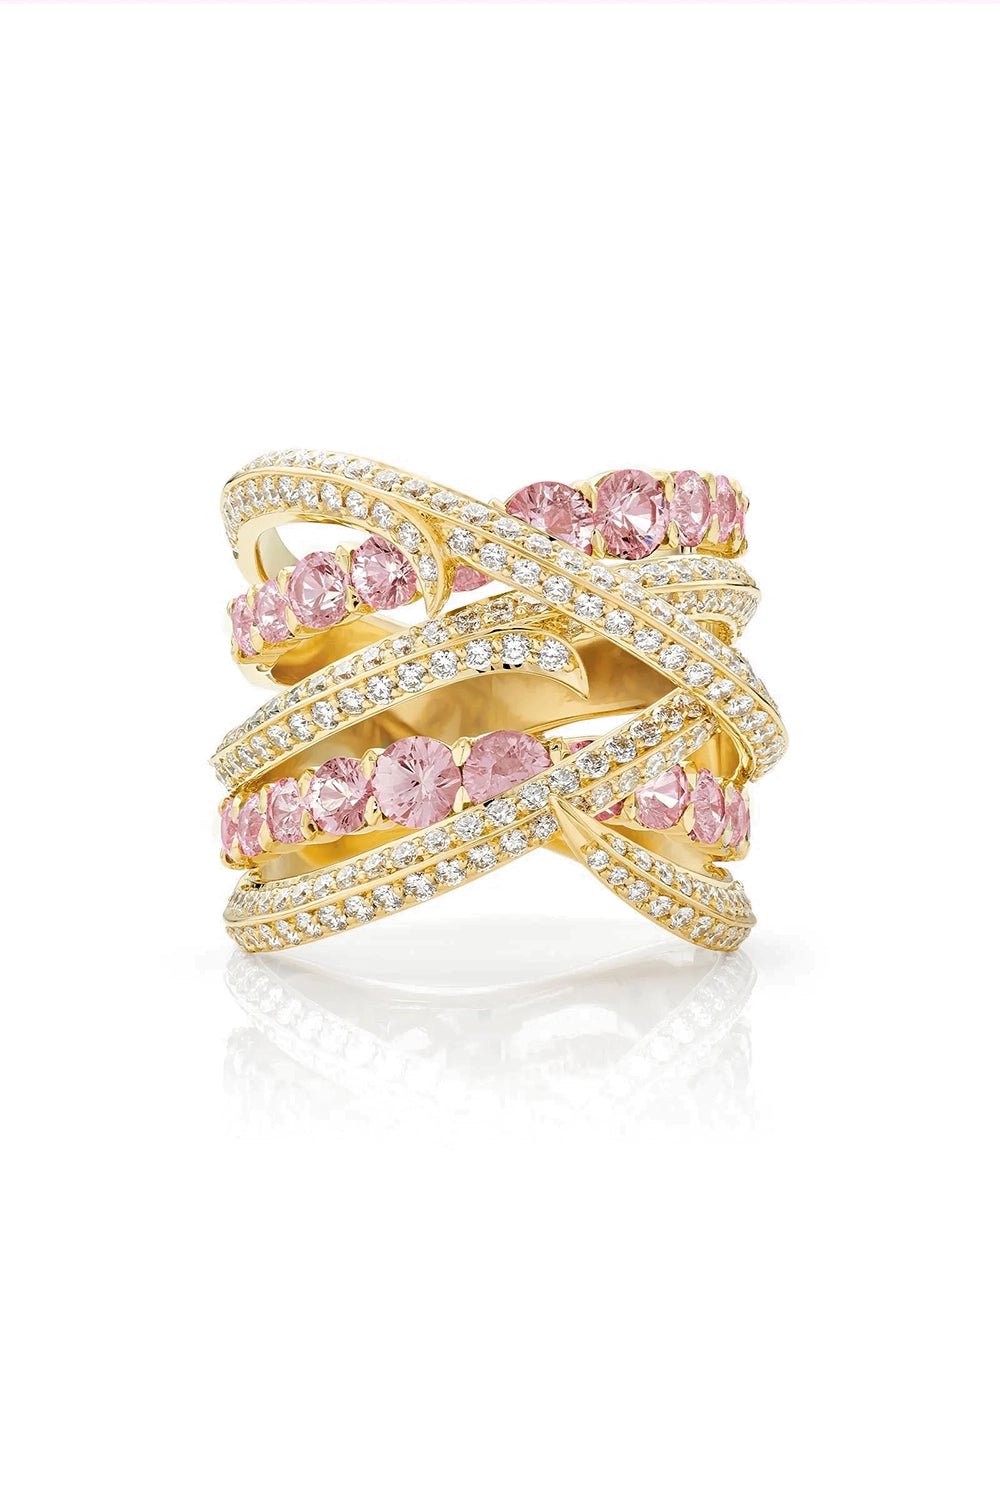 STEPHEN WEBSTER-Bound Together Band Ring-YELLOW GOLD